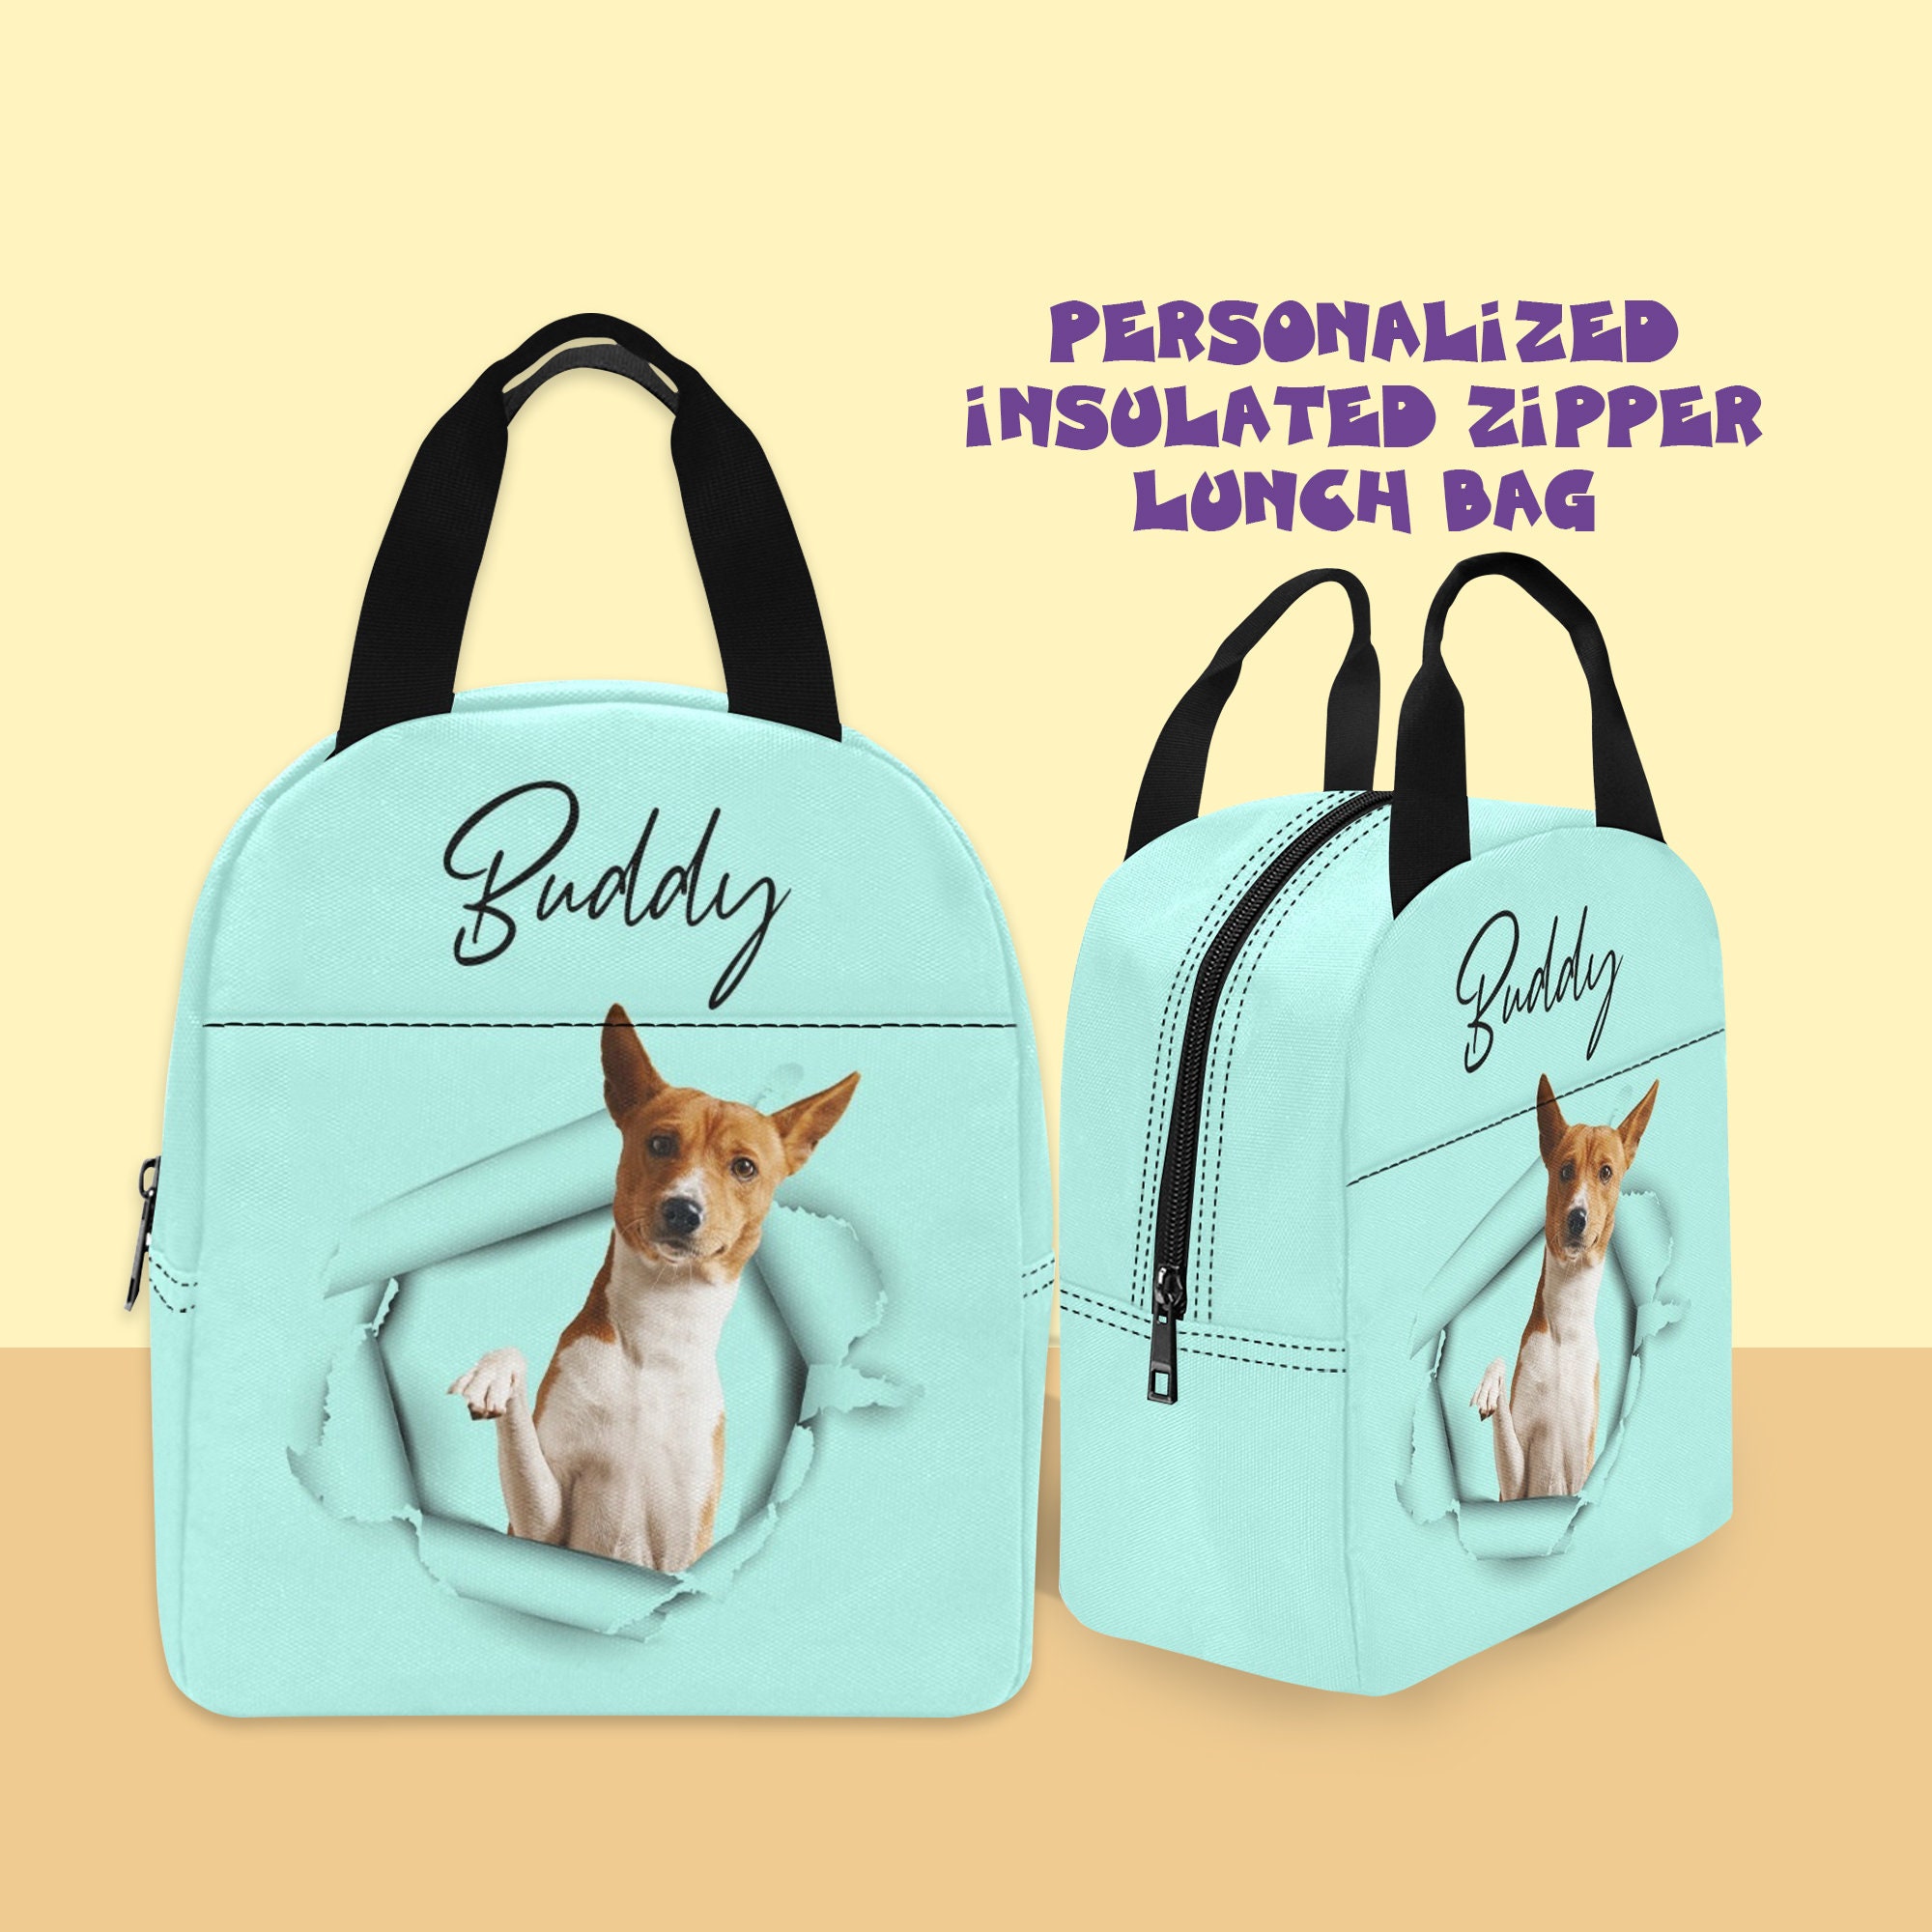 Onled Boxer Dog Lunch Bag Insulated Freezable Cute Puppy Lunch Tote Cooler Handbag Lunch Box for Women Men Picnic Travel Portable Lunch Kit Reusable 